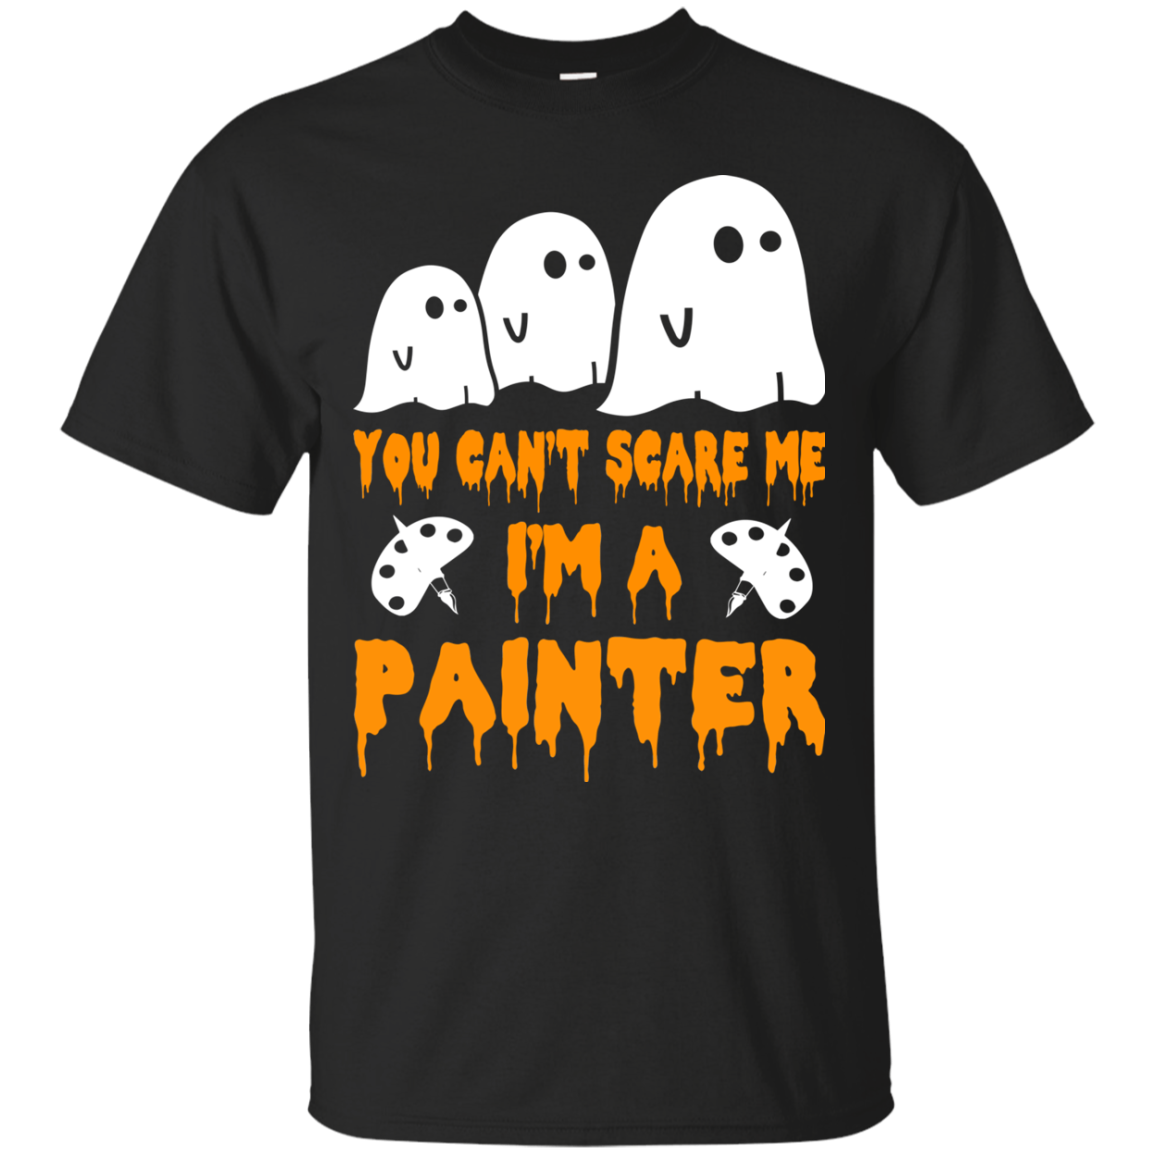 You can’t scare me I'm a Painter shirt, hoodie, tank